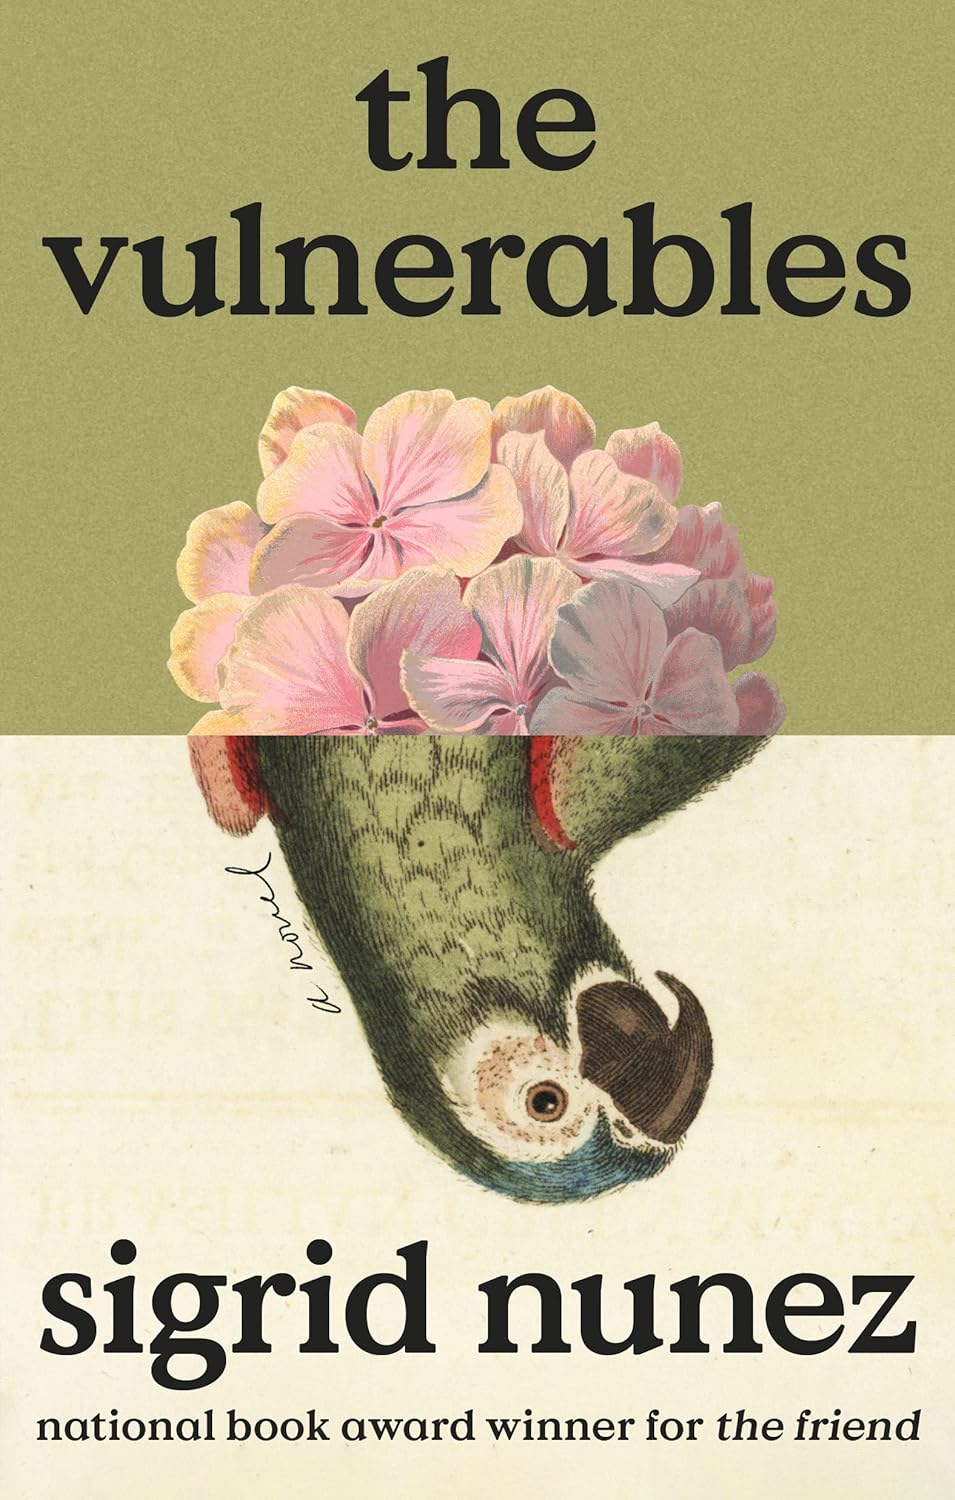 Image for "The Vulnerables"